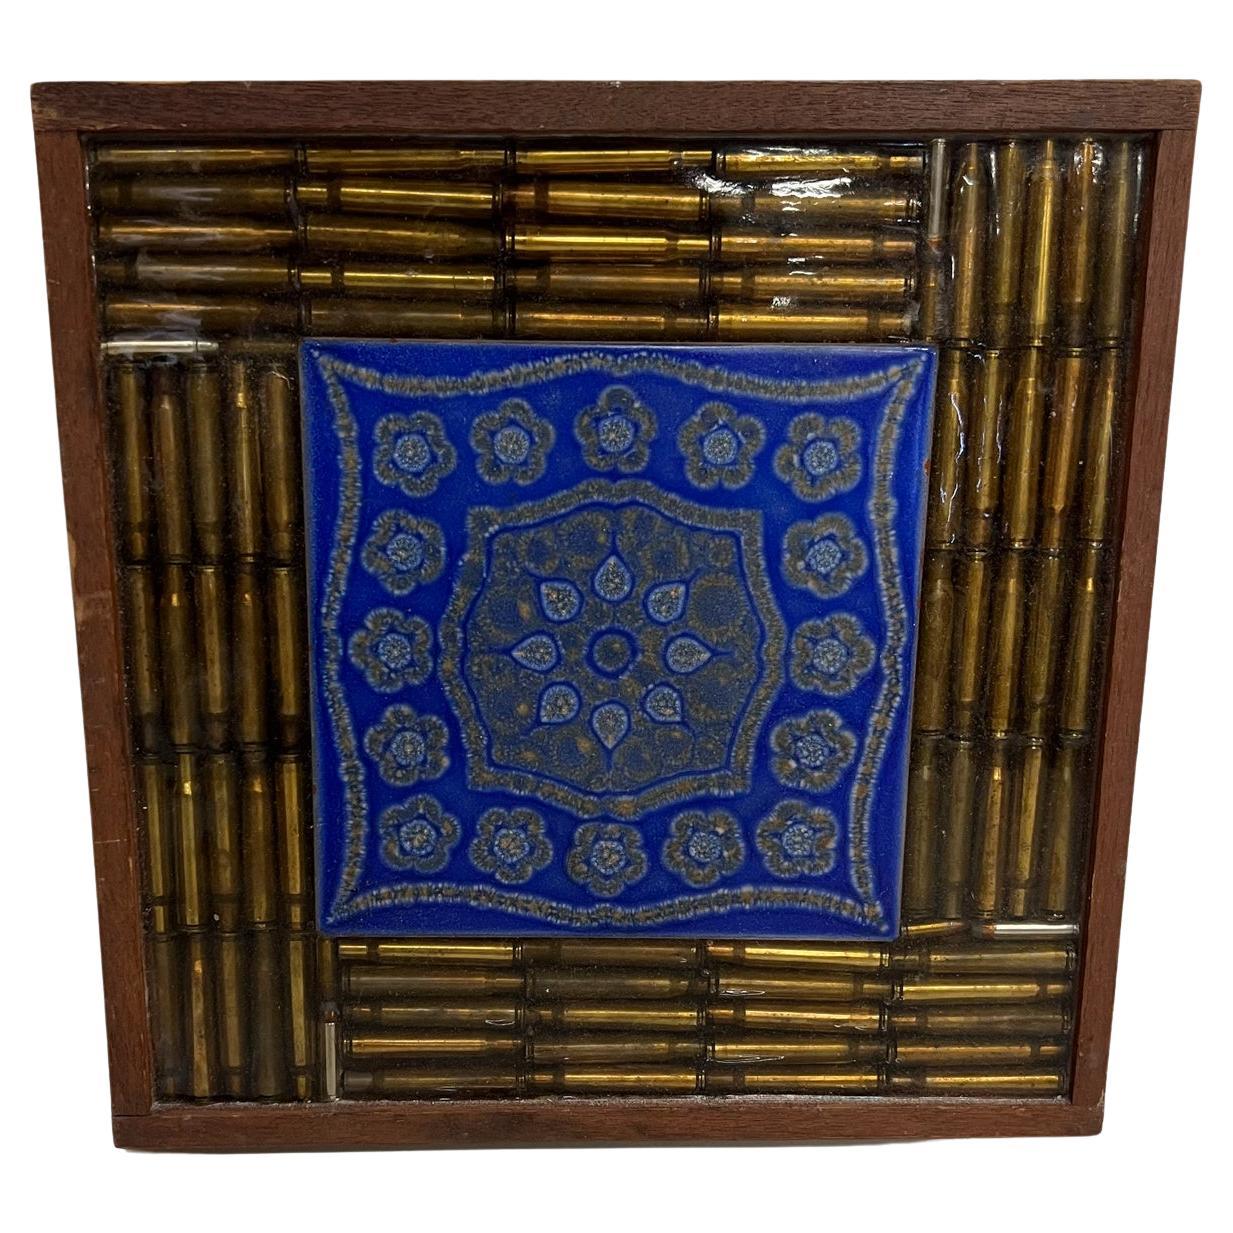 1970s Wall Art Framed Bullet Mosaic with Decorative Blue Tile